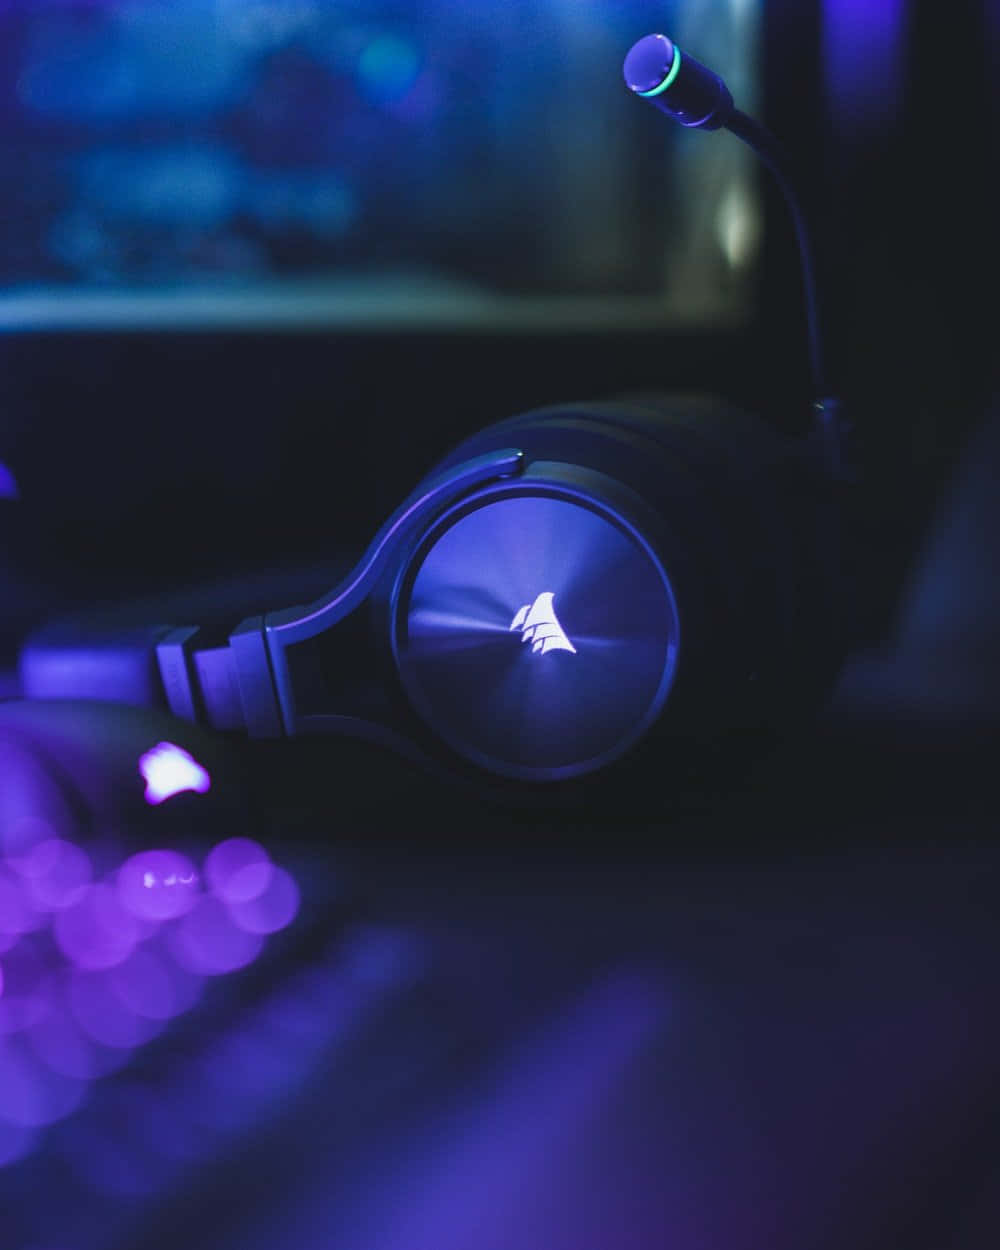 A Gaming Headset With Purple Lights On It